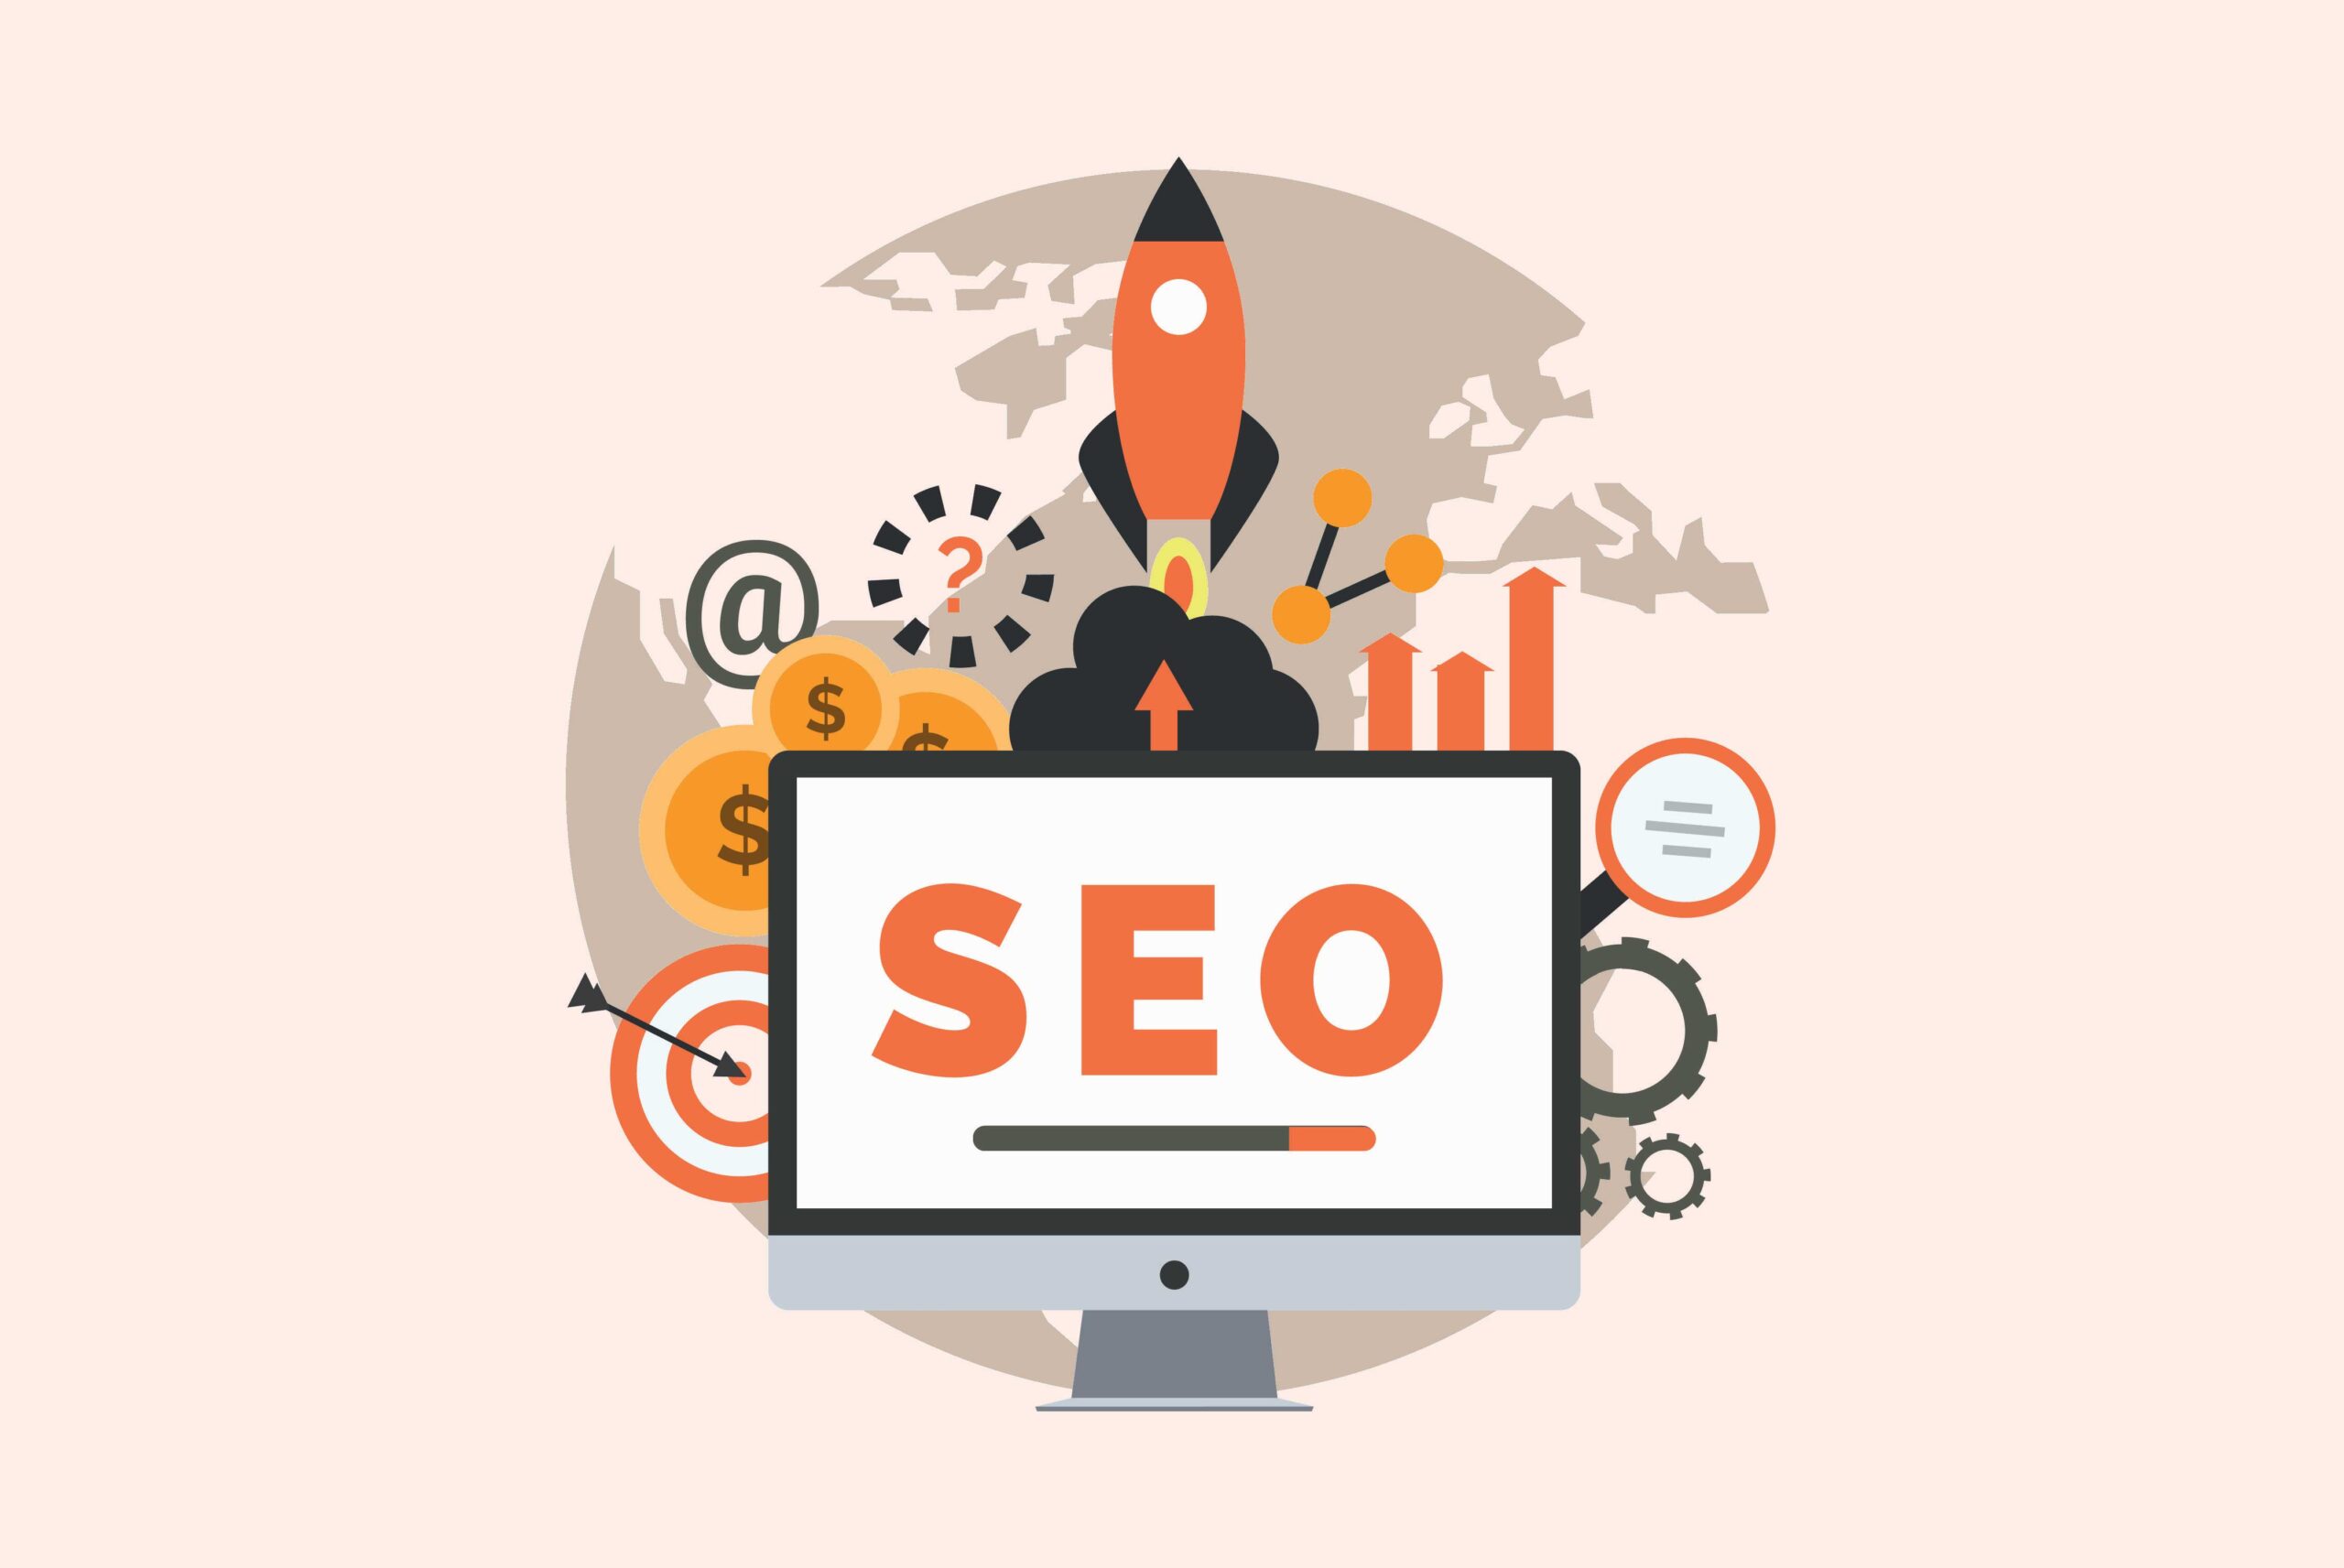 How Our SEO Services Can Skyrocket Your Website Traffic and Sales